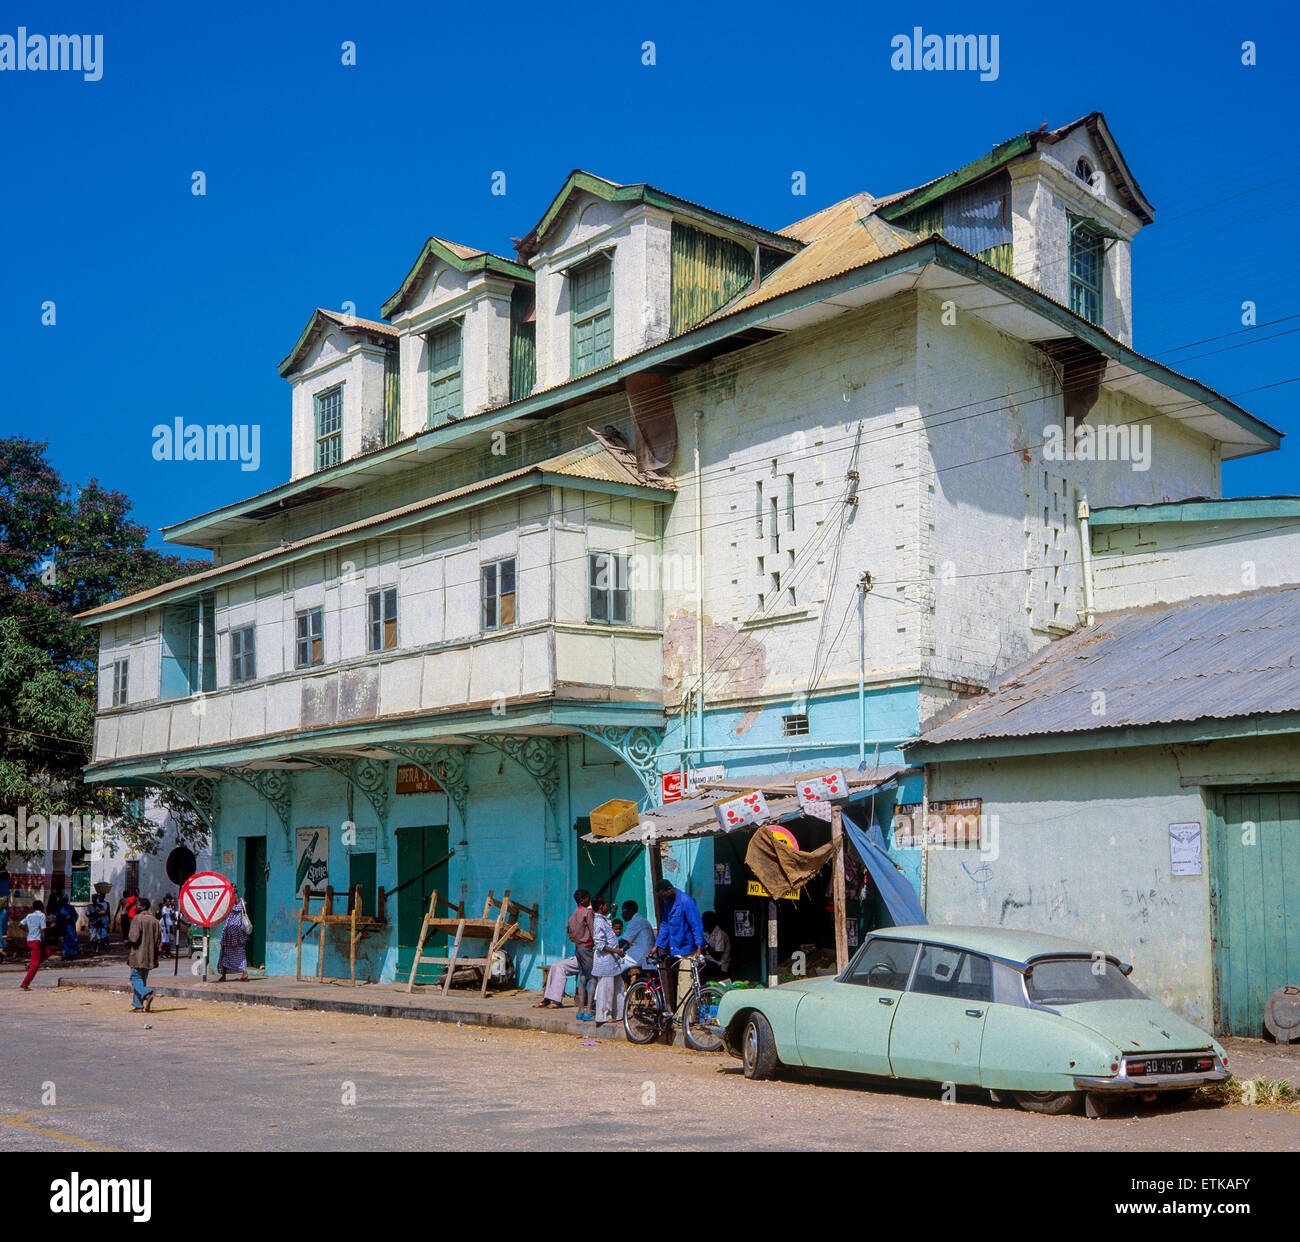 Opera store building, Banjul, Gambia, West Africa Stock Photo